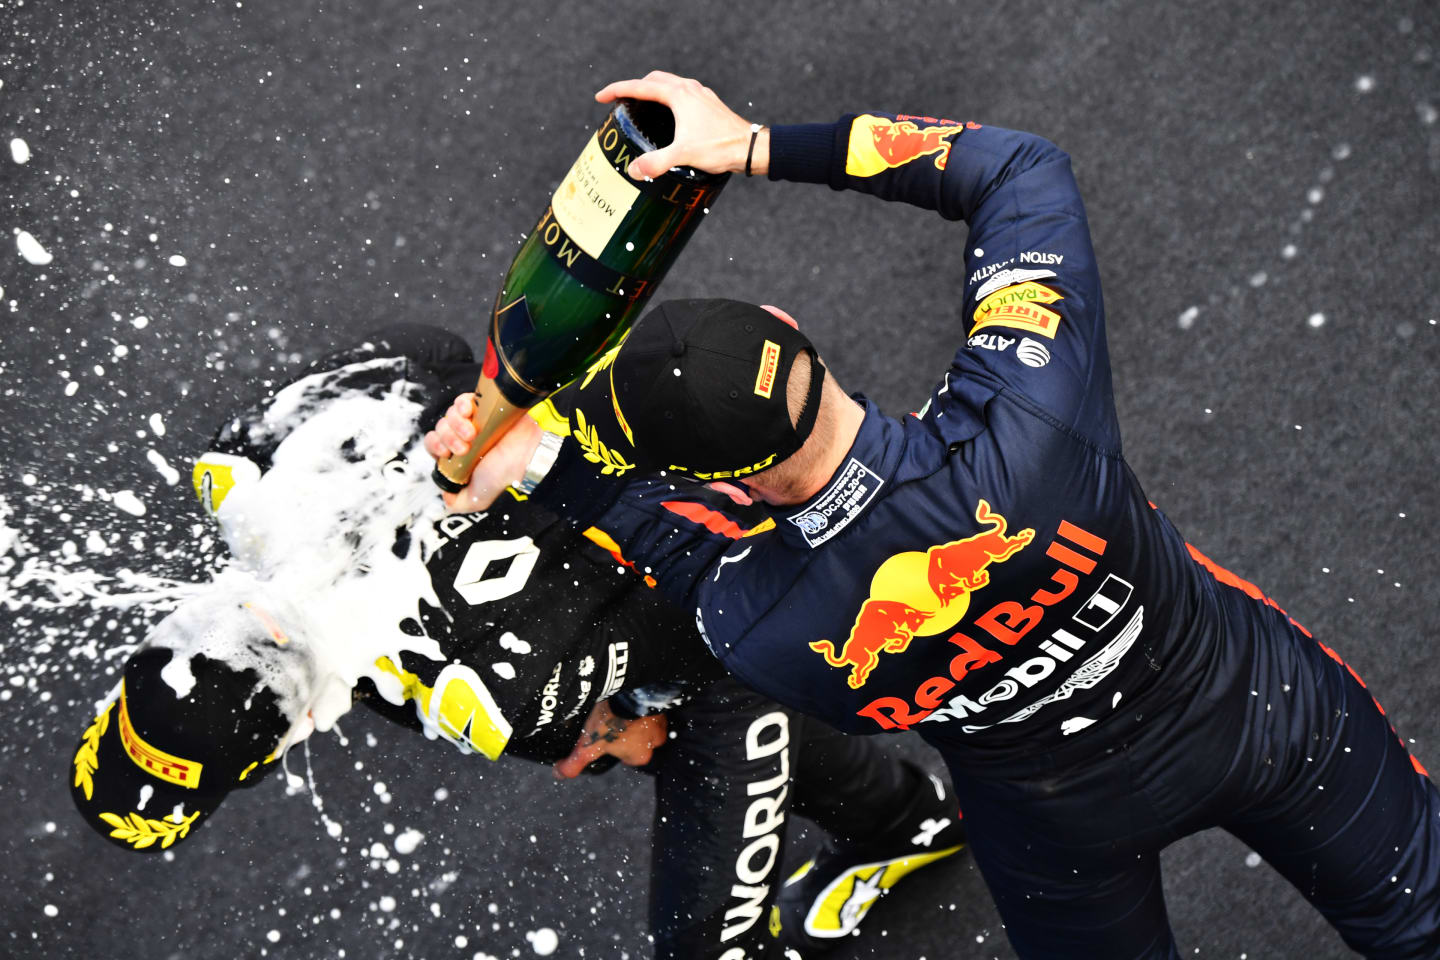 NUERBURG, GERMANY - OCTOBER 11: Daniel Ricciardo of Renault and Second placed Max Verstappen of Netherlands and Red Bull Racing celebrate on the podium during the F1 Eifel Grand Prix at Nuerburgring on October 11, 2020 in Nuerburg, Germany. (Photo by Getty Images/Getty Images)